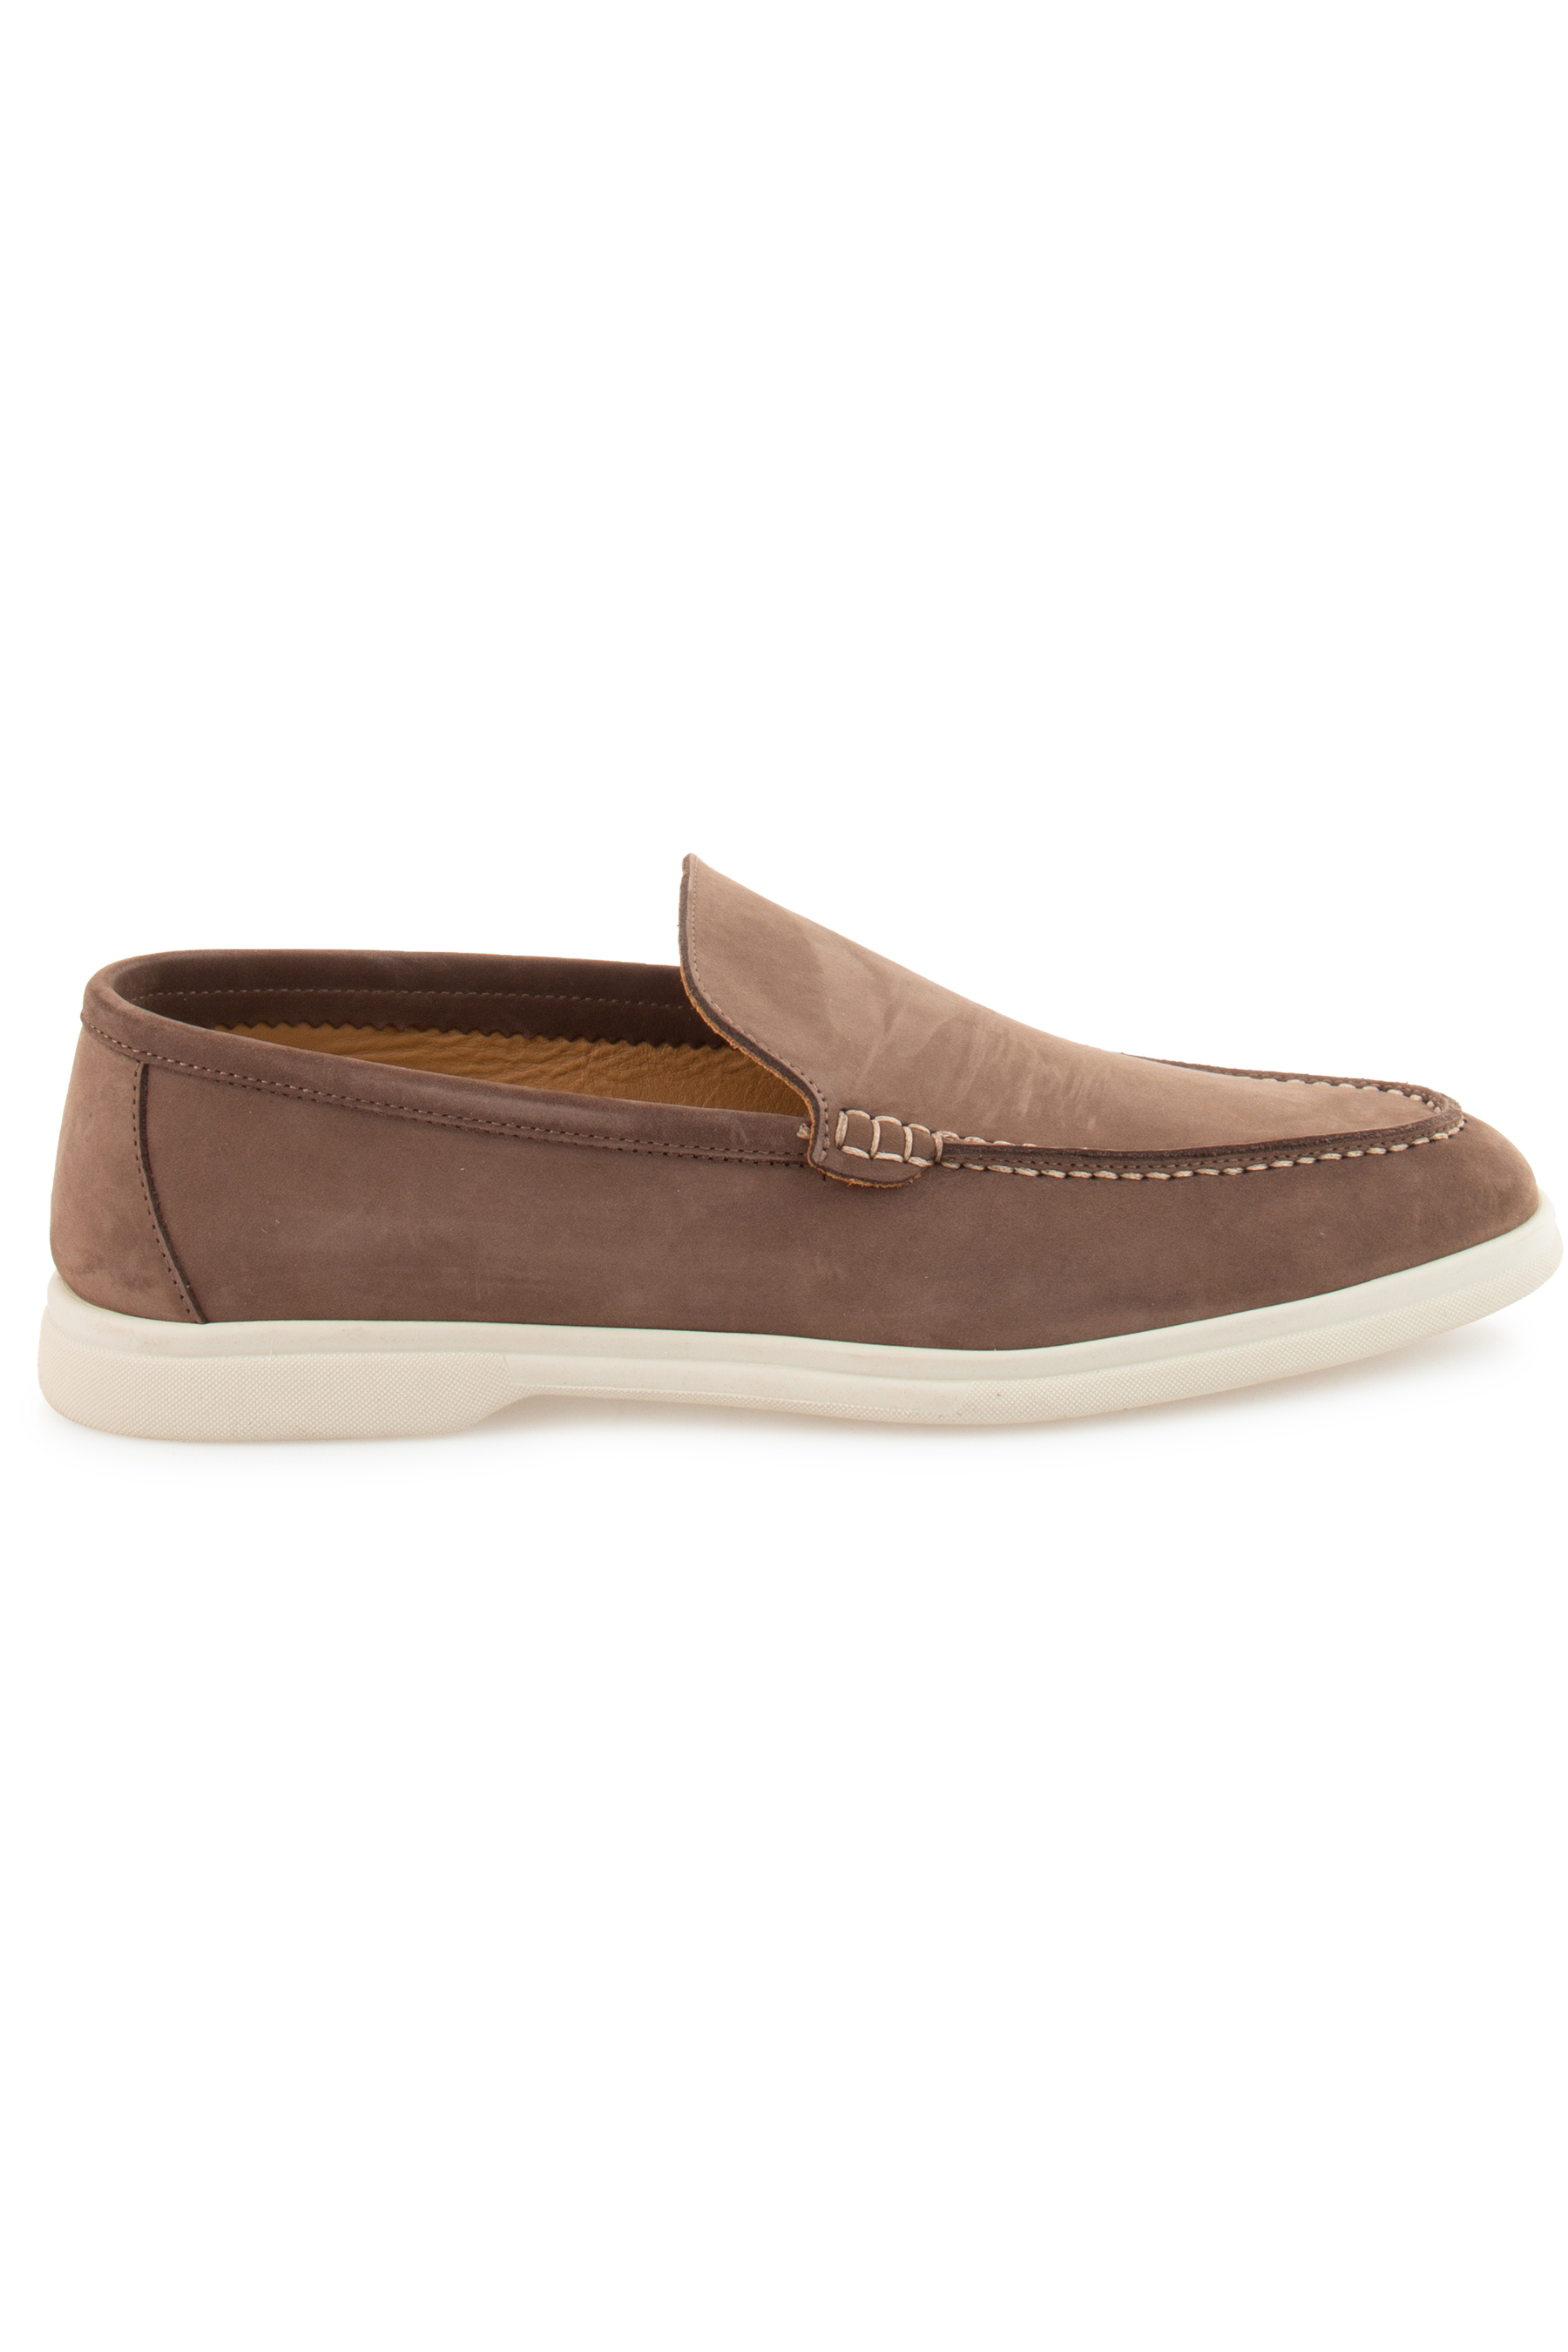 COLOMBO Leather Loafers | Slipper | Lace-up Shoes & Slippers | Shoes ...